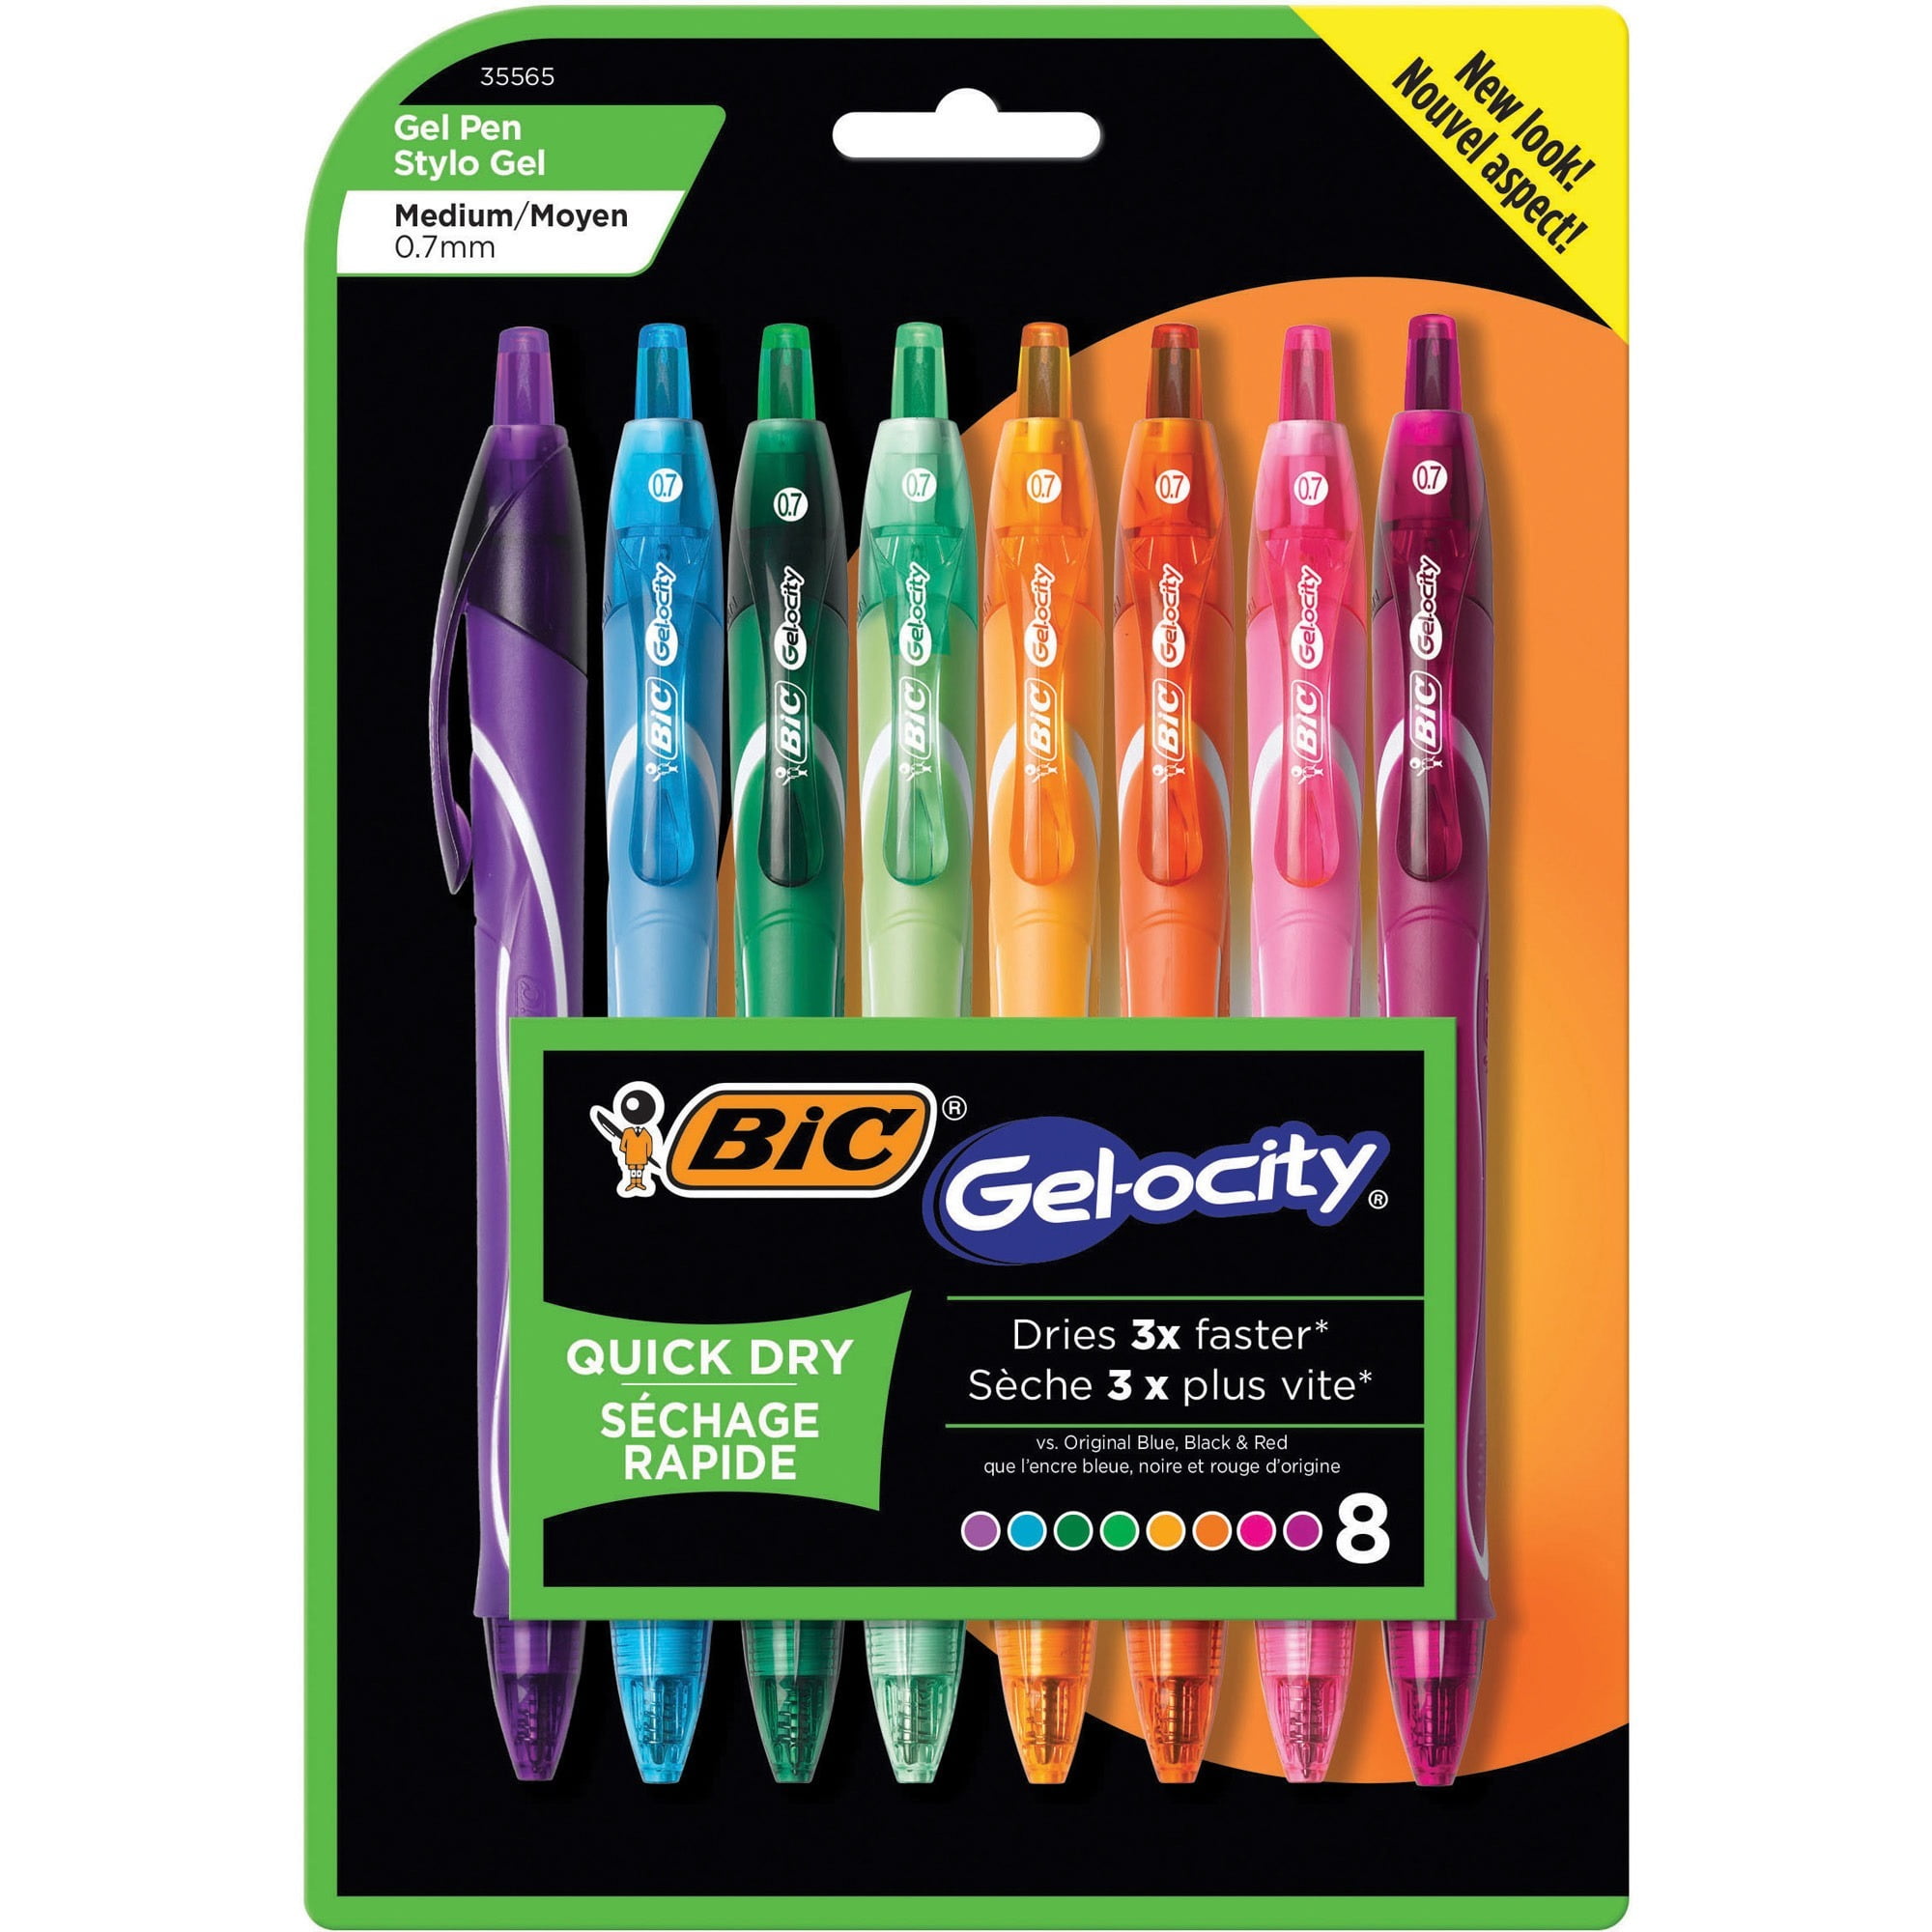 BIC Gel-ocity Quick Dry Assorted Colors Gel Pens, Medium Point (0.7mm),  8-Count Pack, Retractable Gel Pens With Comfortable Full Grip, Colors may  vary 